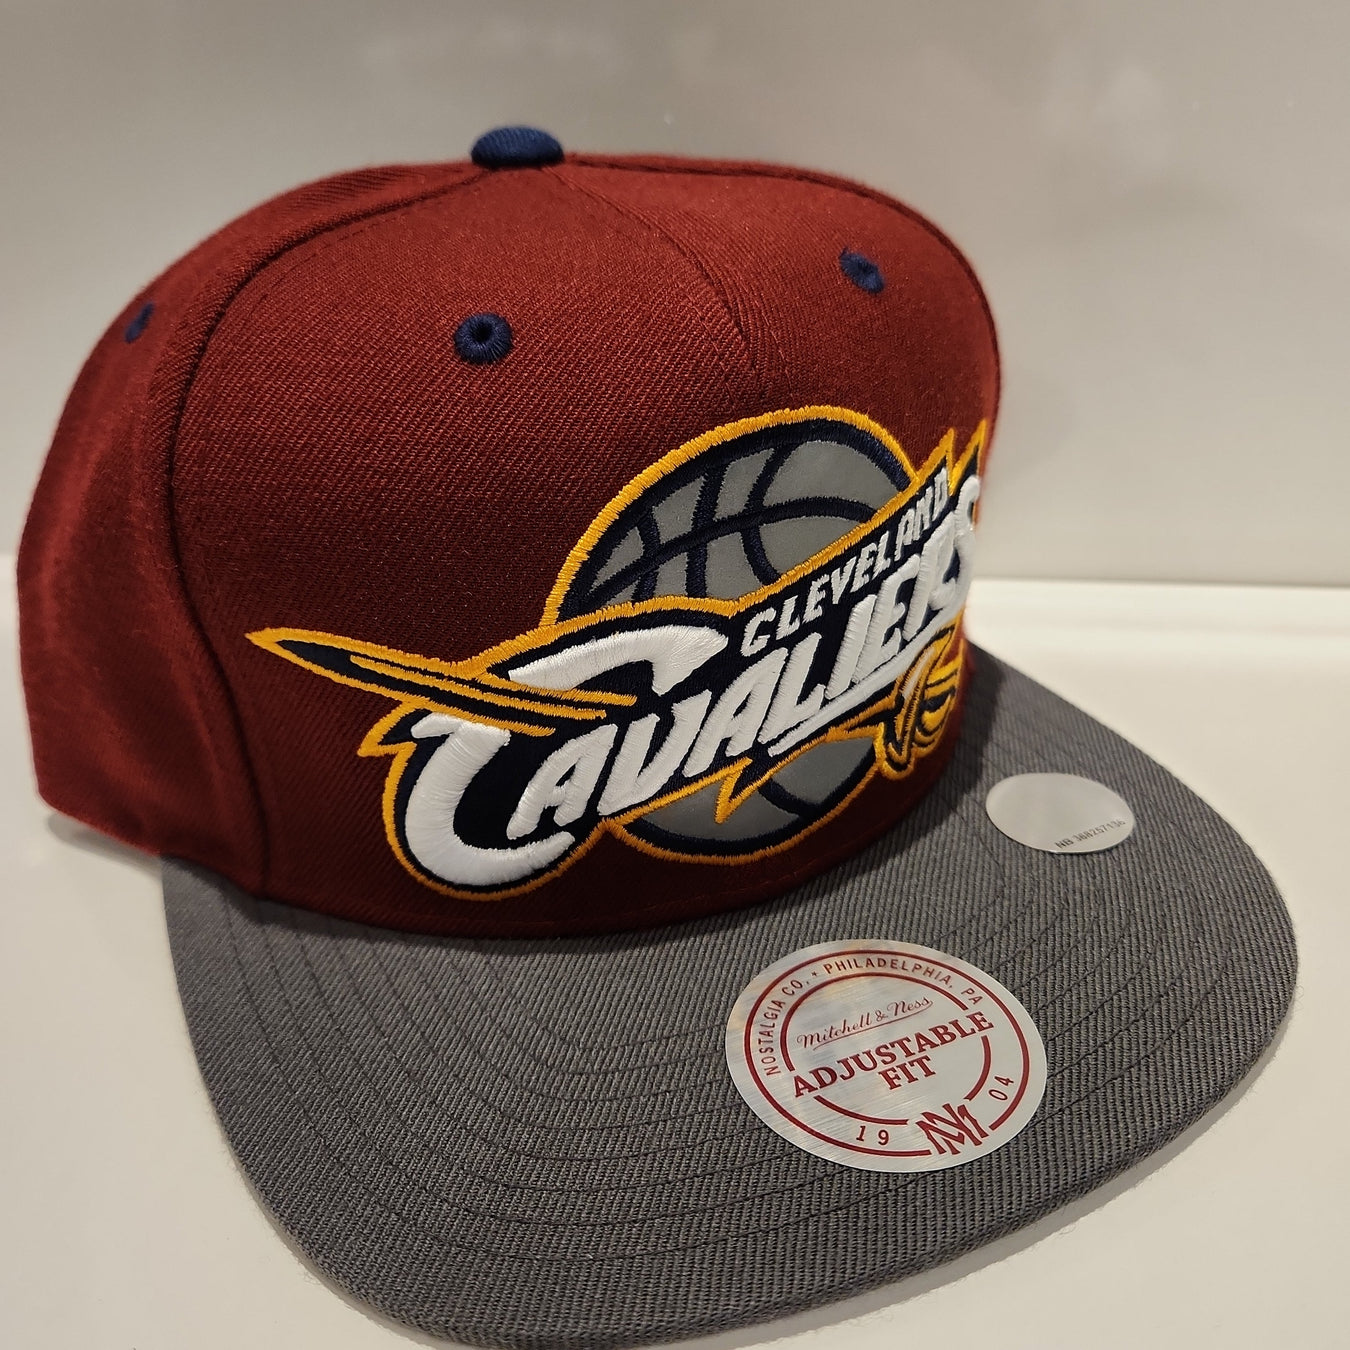 Cleveland Cavaliers NBA Official Licensed Merchandise